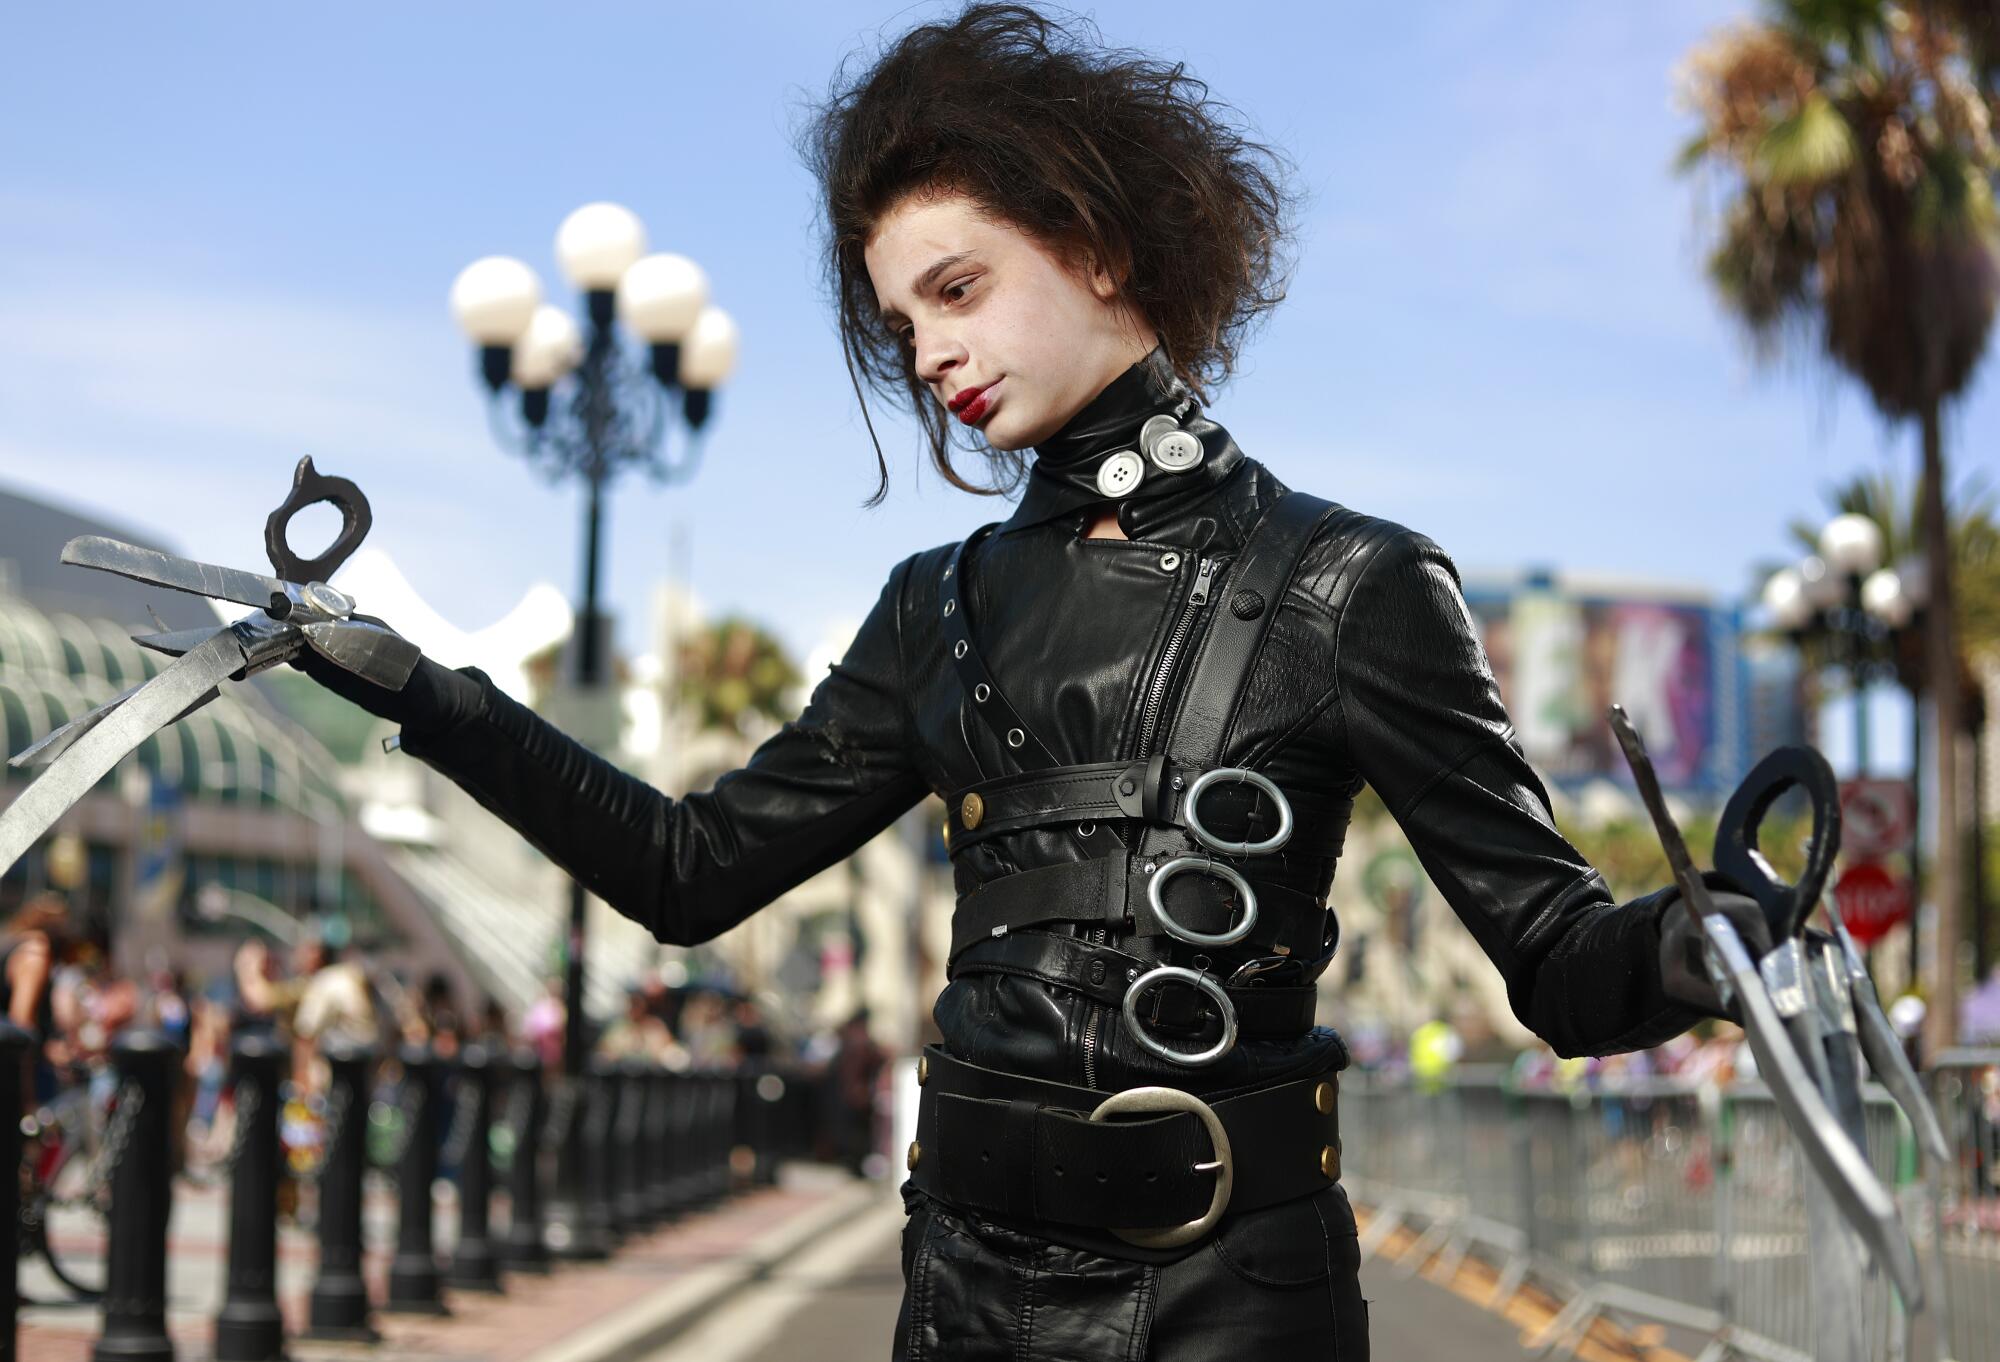 Matias Pasman from the Netherlands dressed as Edward Scissorhands at Comic-Con.